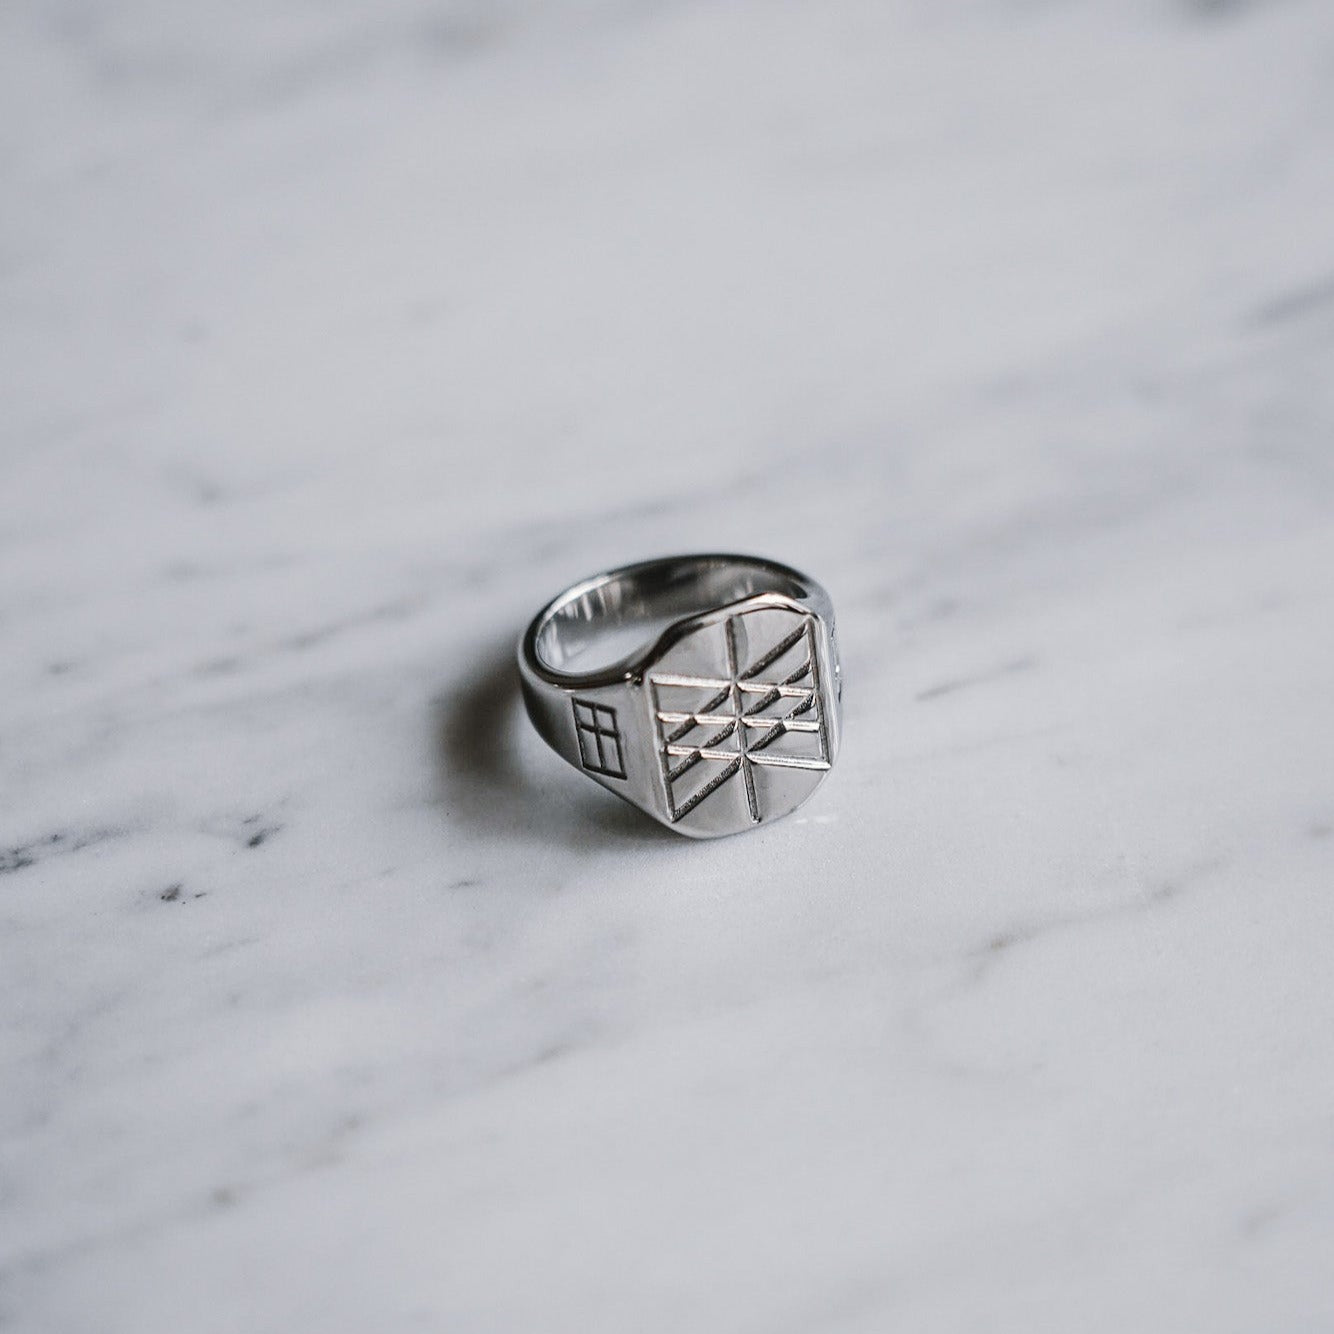 Web of Wyrd Signature ring - Silver-toned